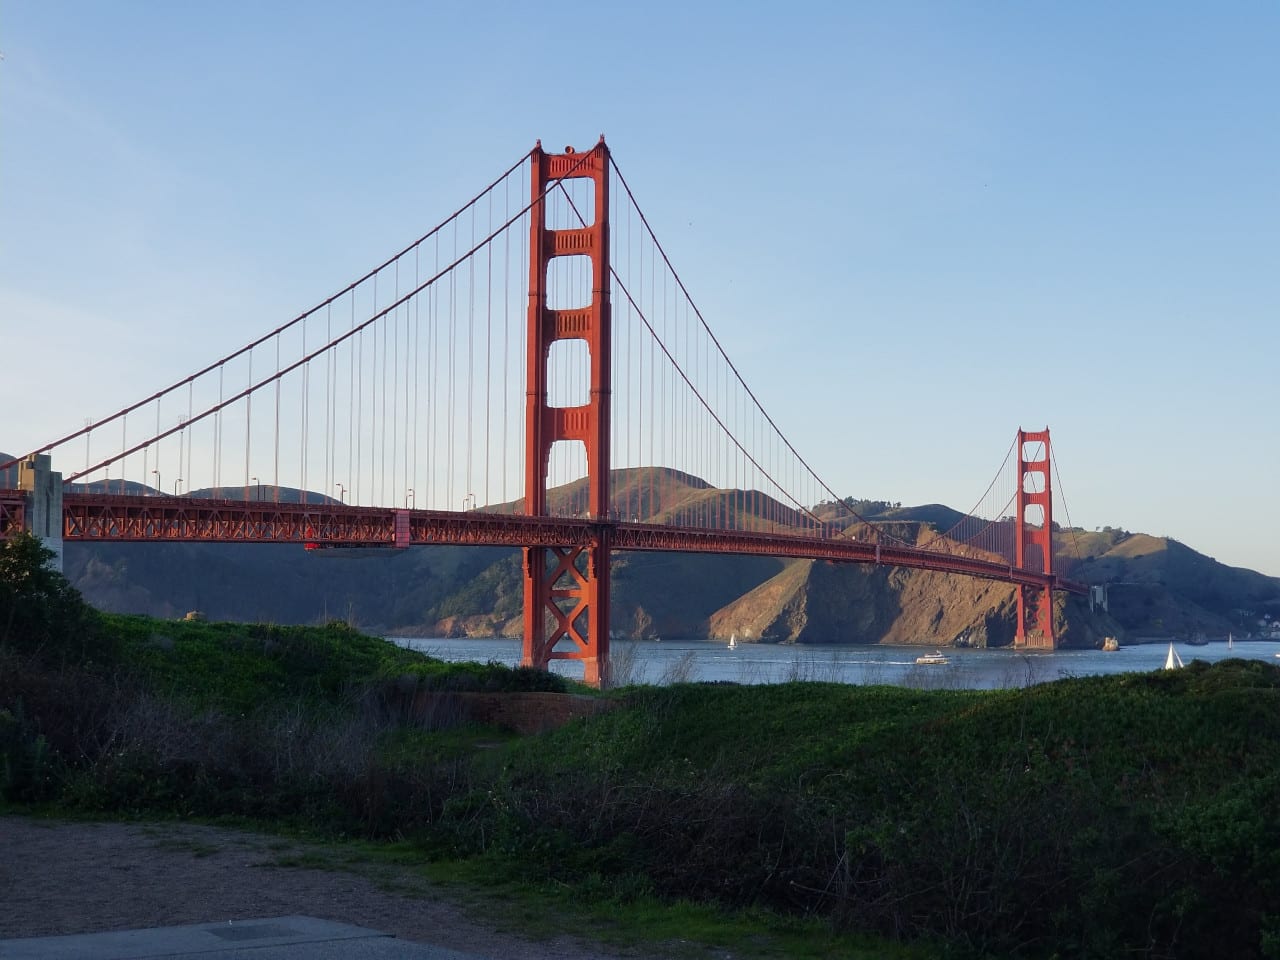 Local's guide to San Francisco with the best places to see in San Francisco, restaurants, hotels, and tips - Earth's Attractions - travel guides by locals, travel itineraries, travel tips, and more